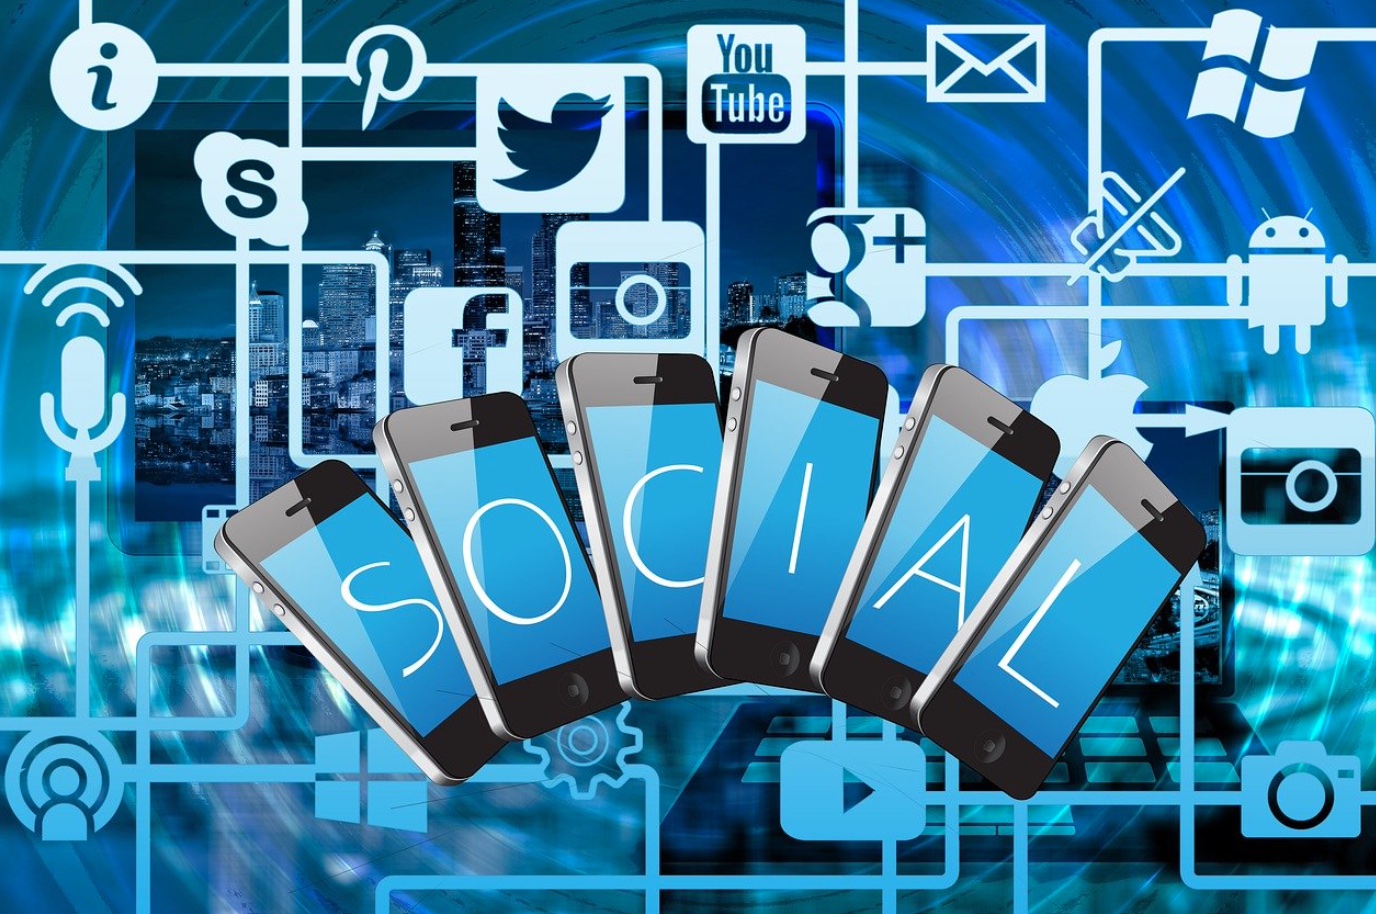 Graphic showing social spelled out one letter at a time on six phone screens, with a background of different social media icons; image by Geralt, via Pixabay.com.